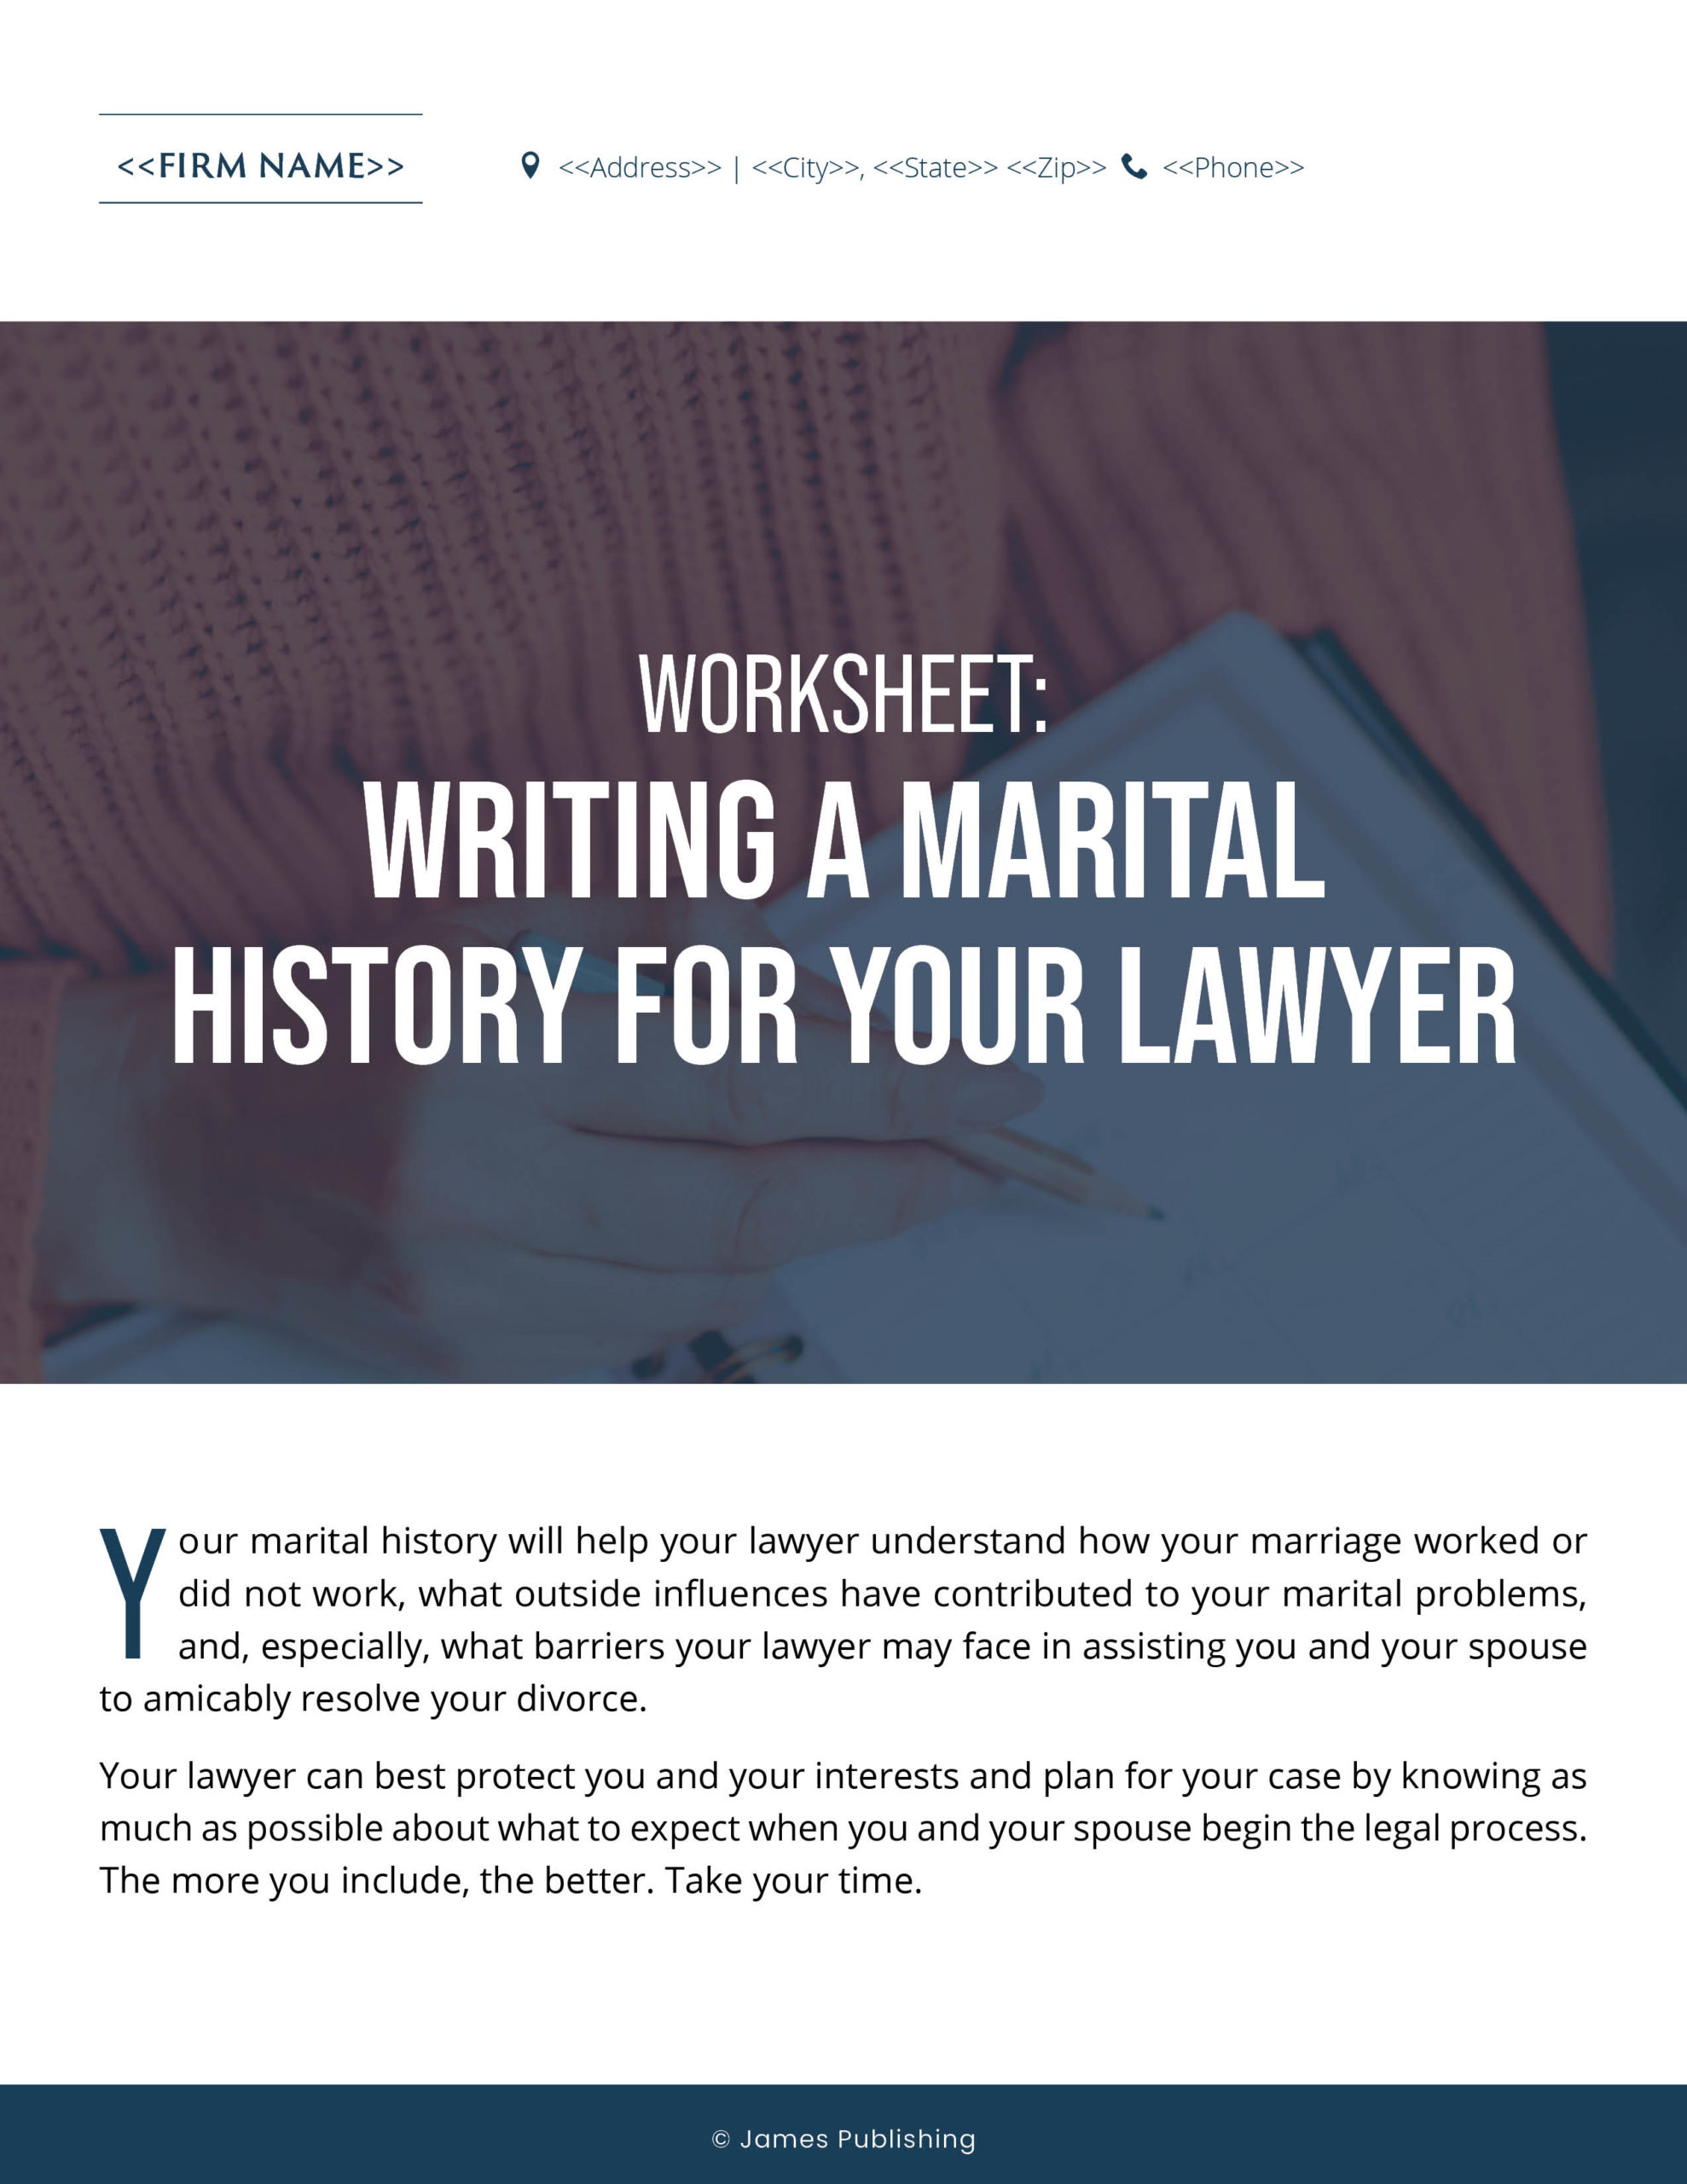 FAM-22 Writing a Marital History for Your Lawyer